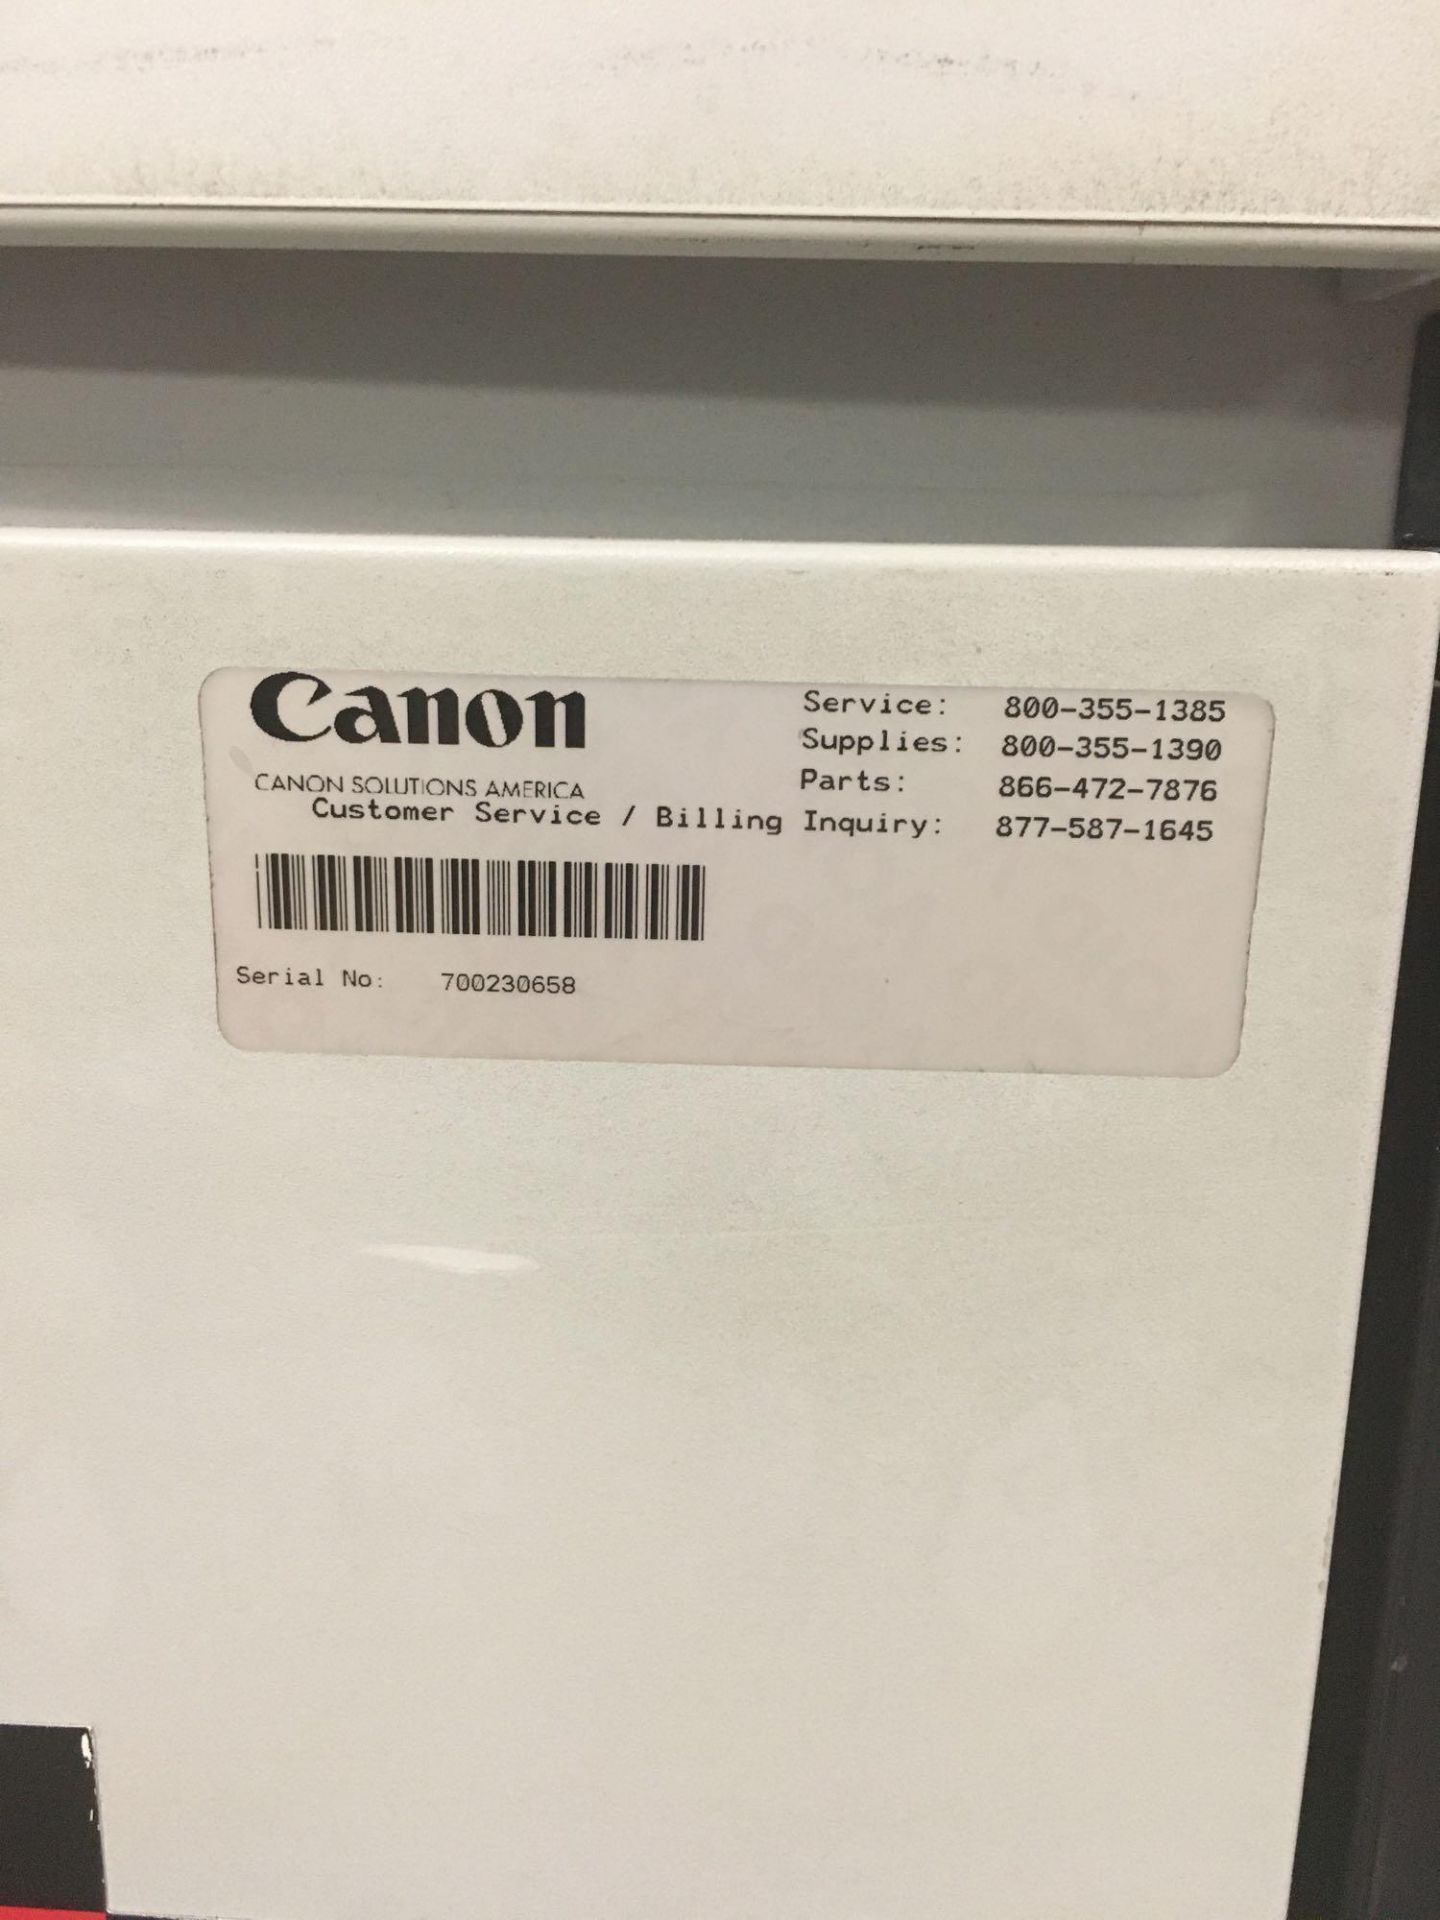 2016 Canon Oce’ Varioprint 6320 UltraPlus Hi Speed B&W Digital Printers. Includes Set Finisher, Stac - Image 7 of 8